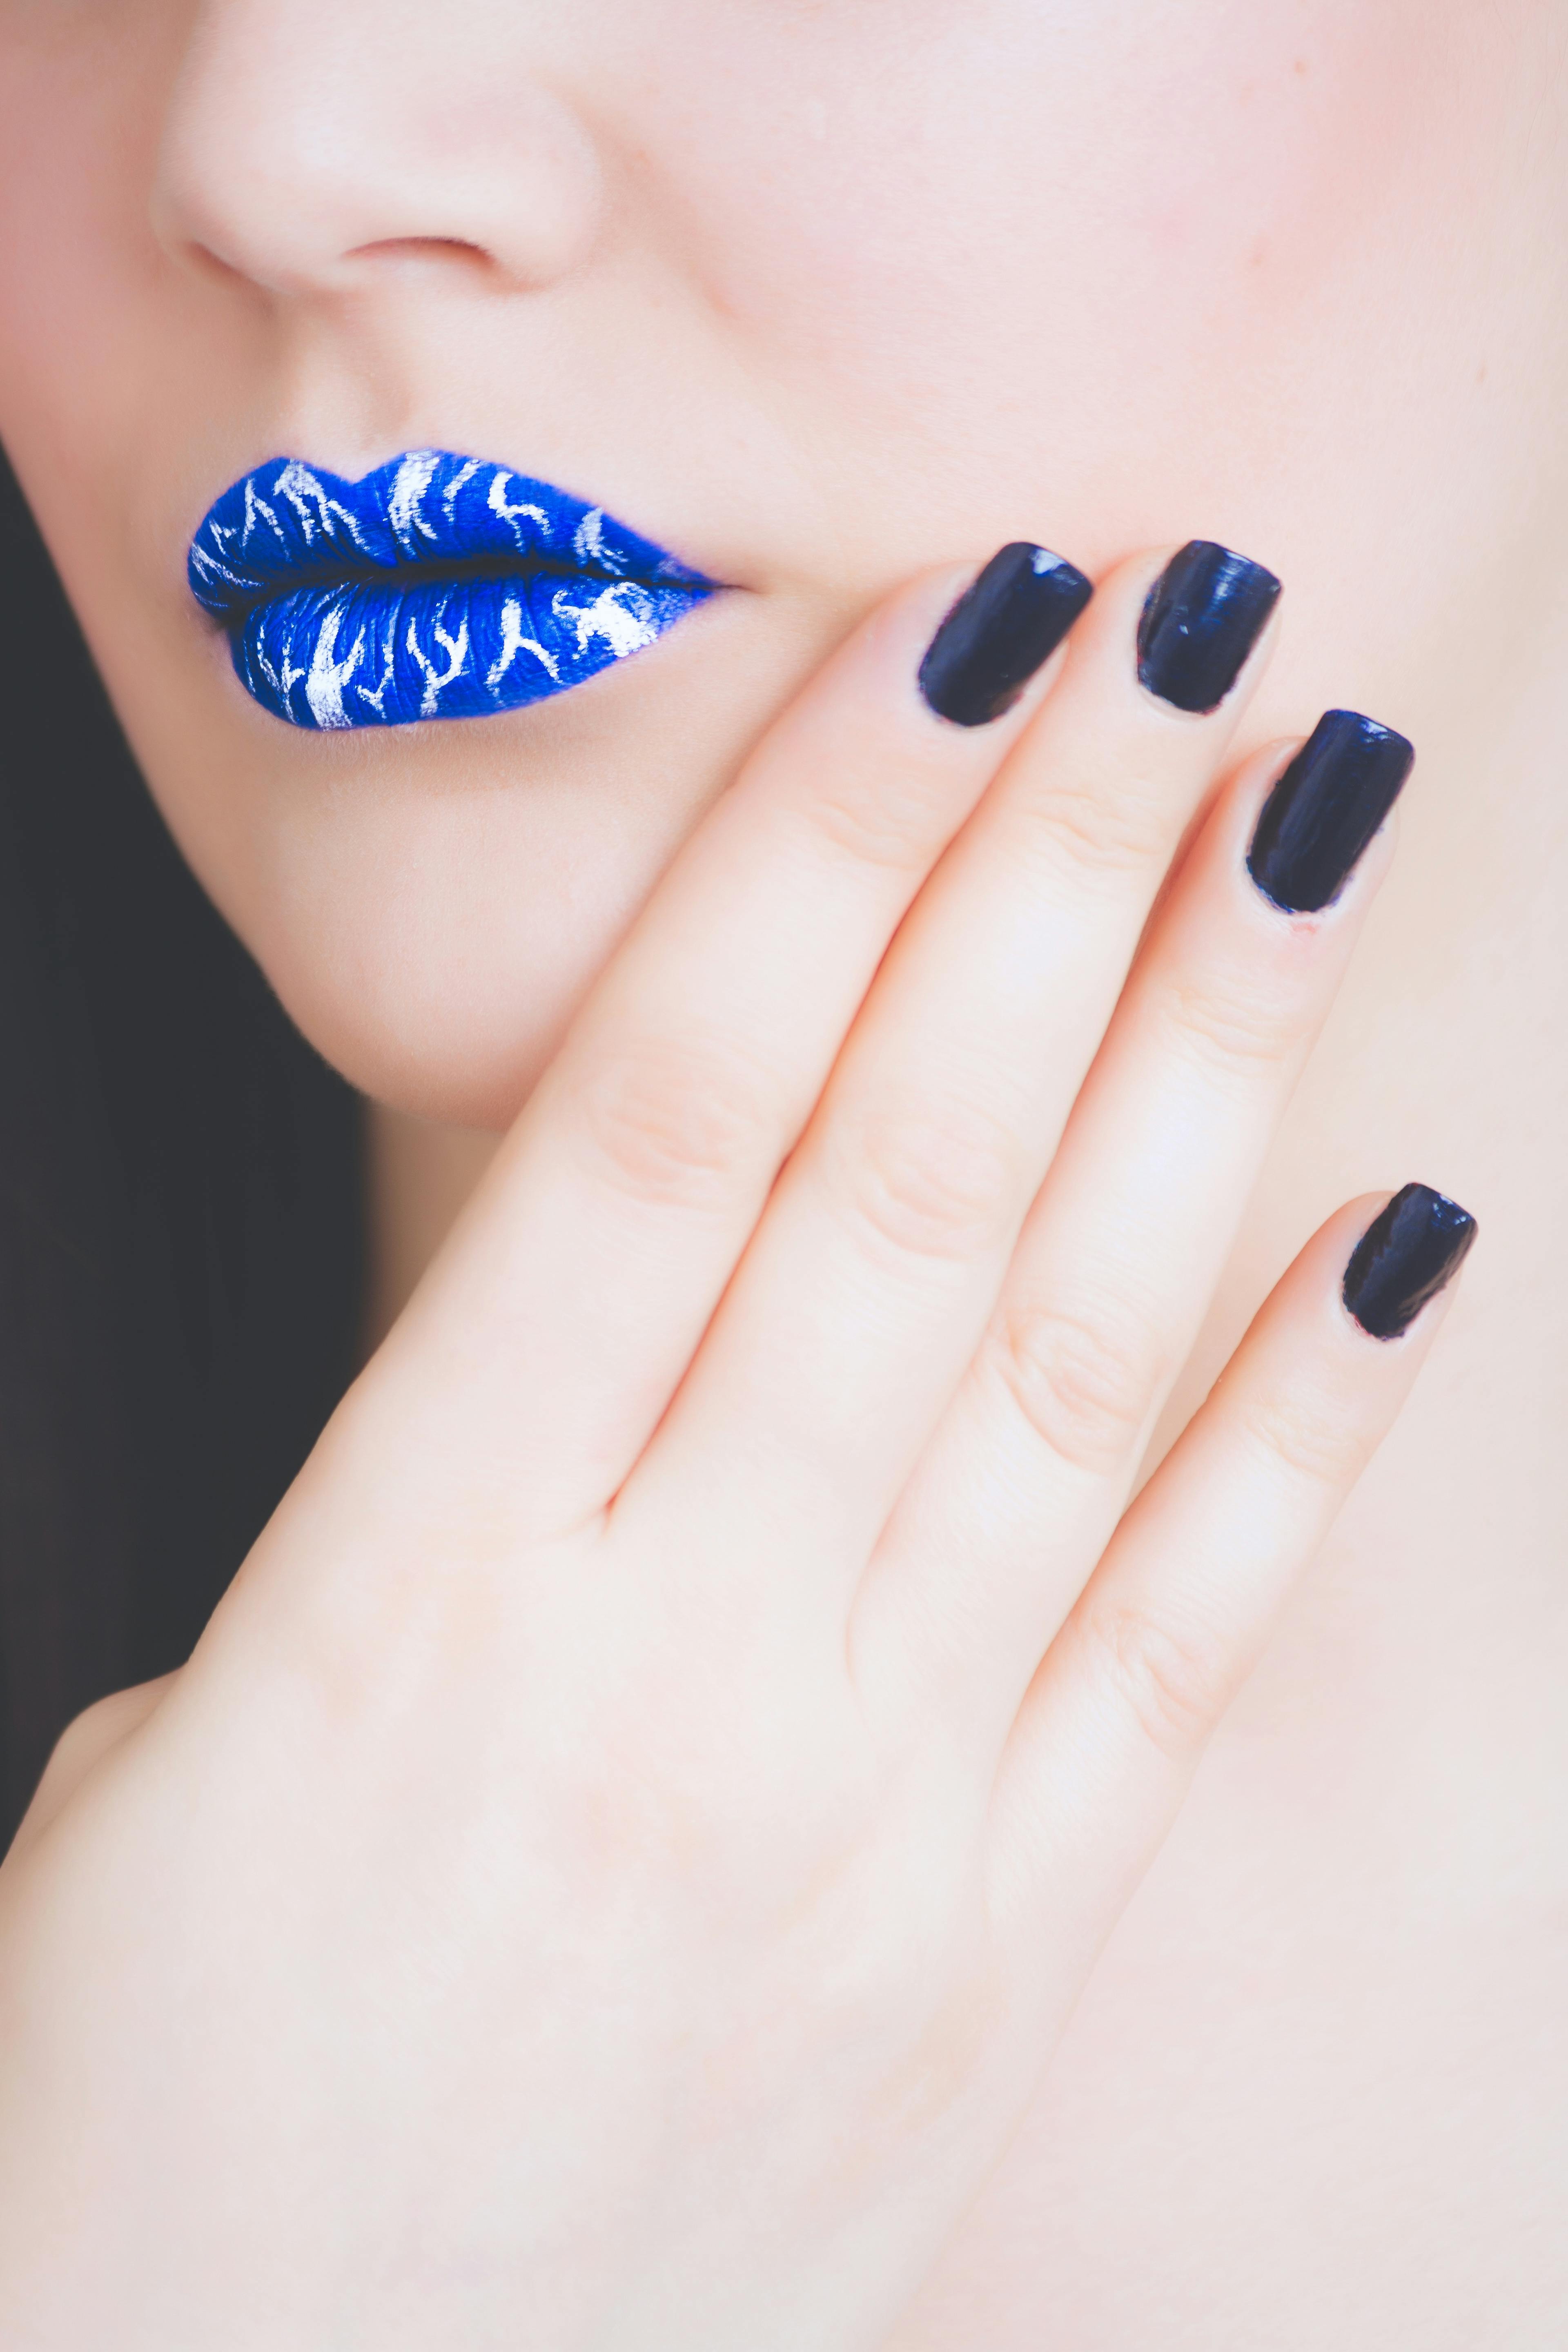 Woman Wearing Blue and White Lipstick With Black Manicure